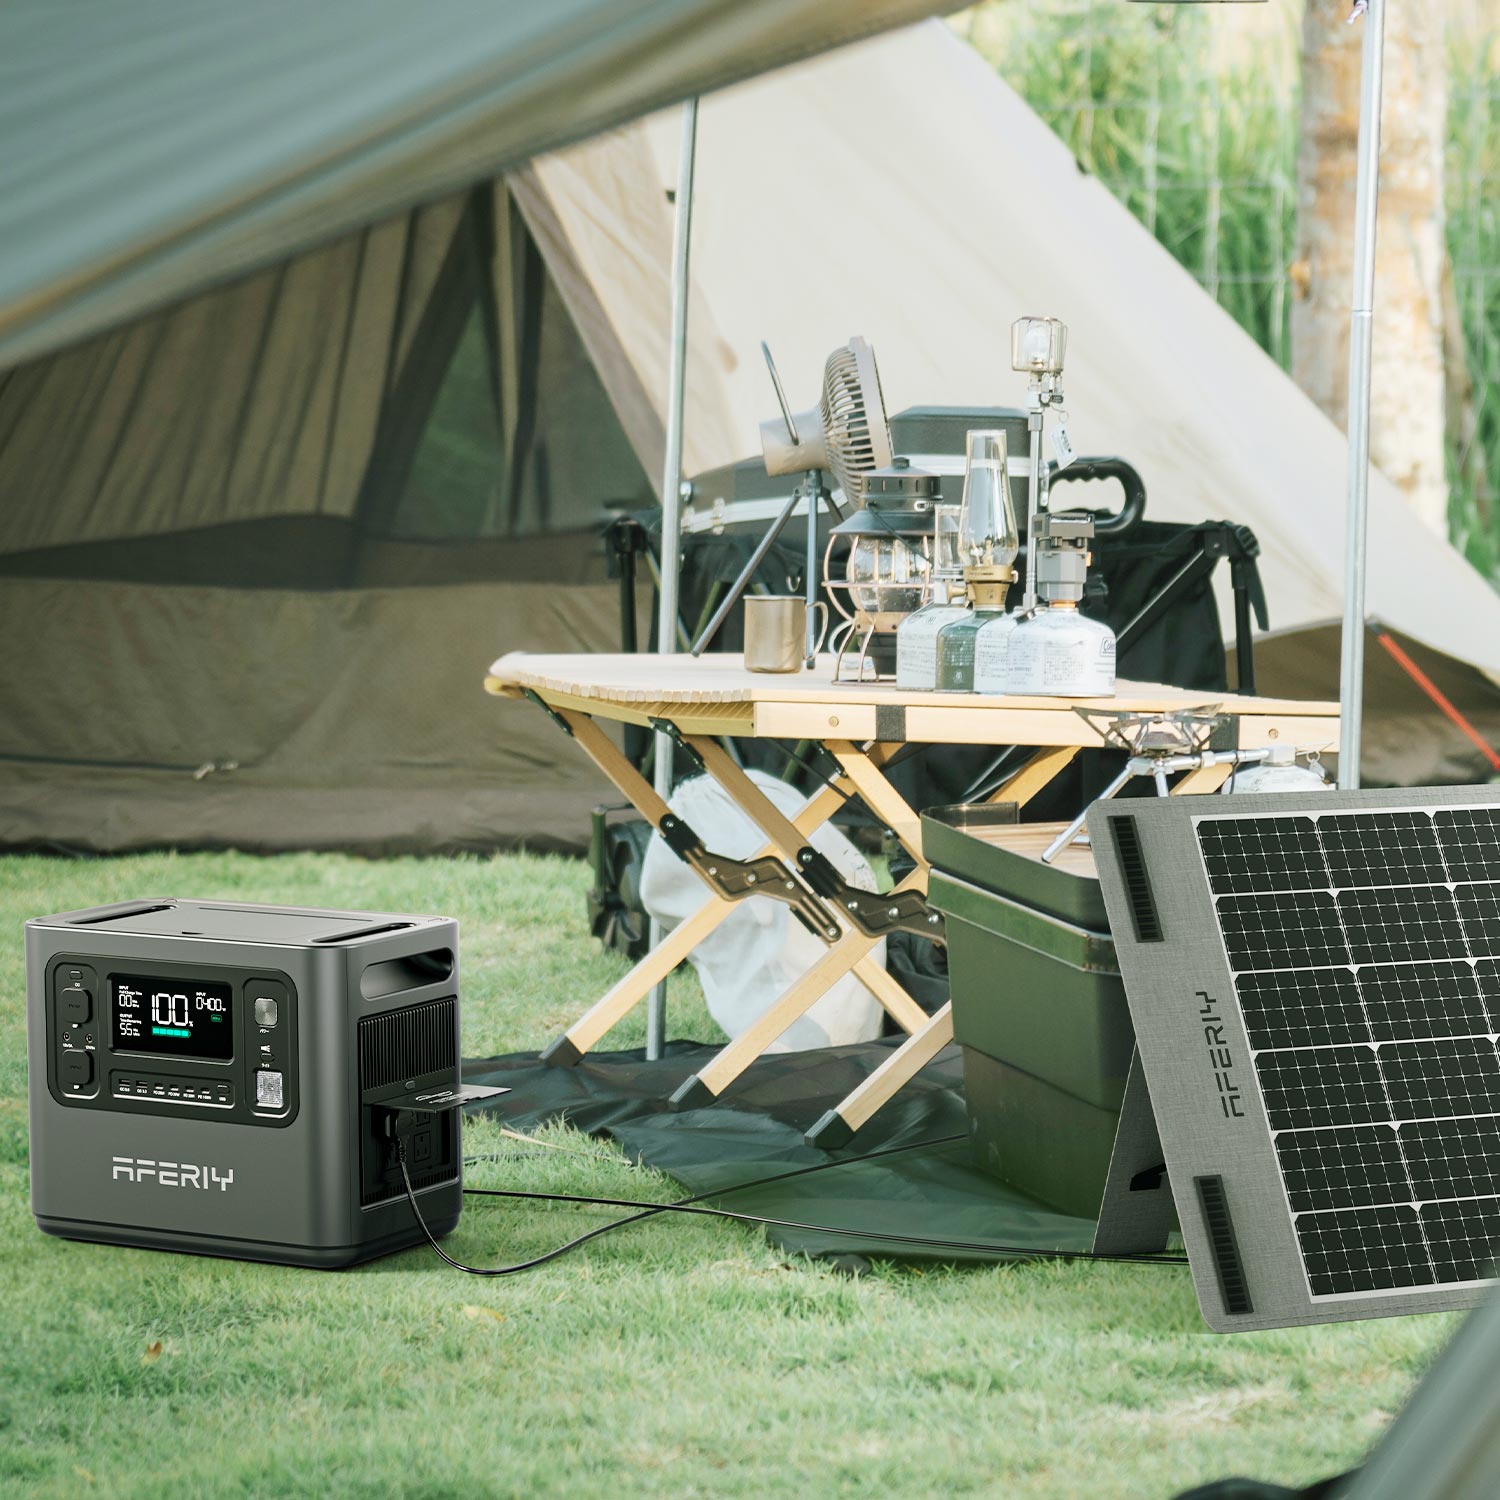 AFERIY P210 Battery: 2 kWh Capacity, 7-Year Warranty & Quick Charging —  Eightify